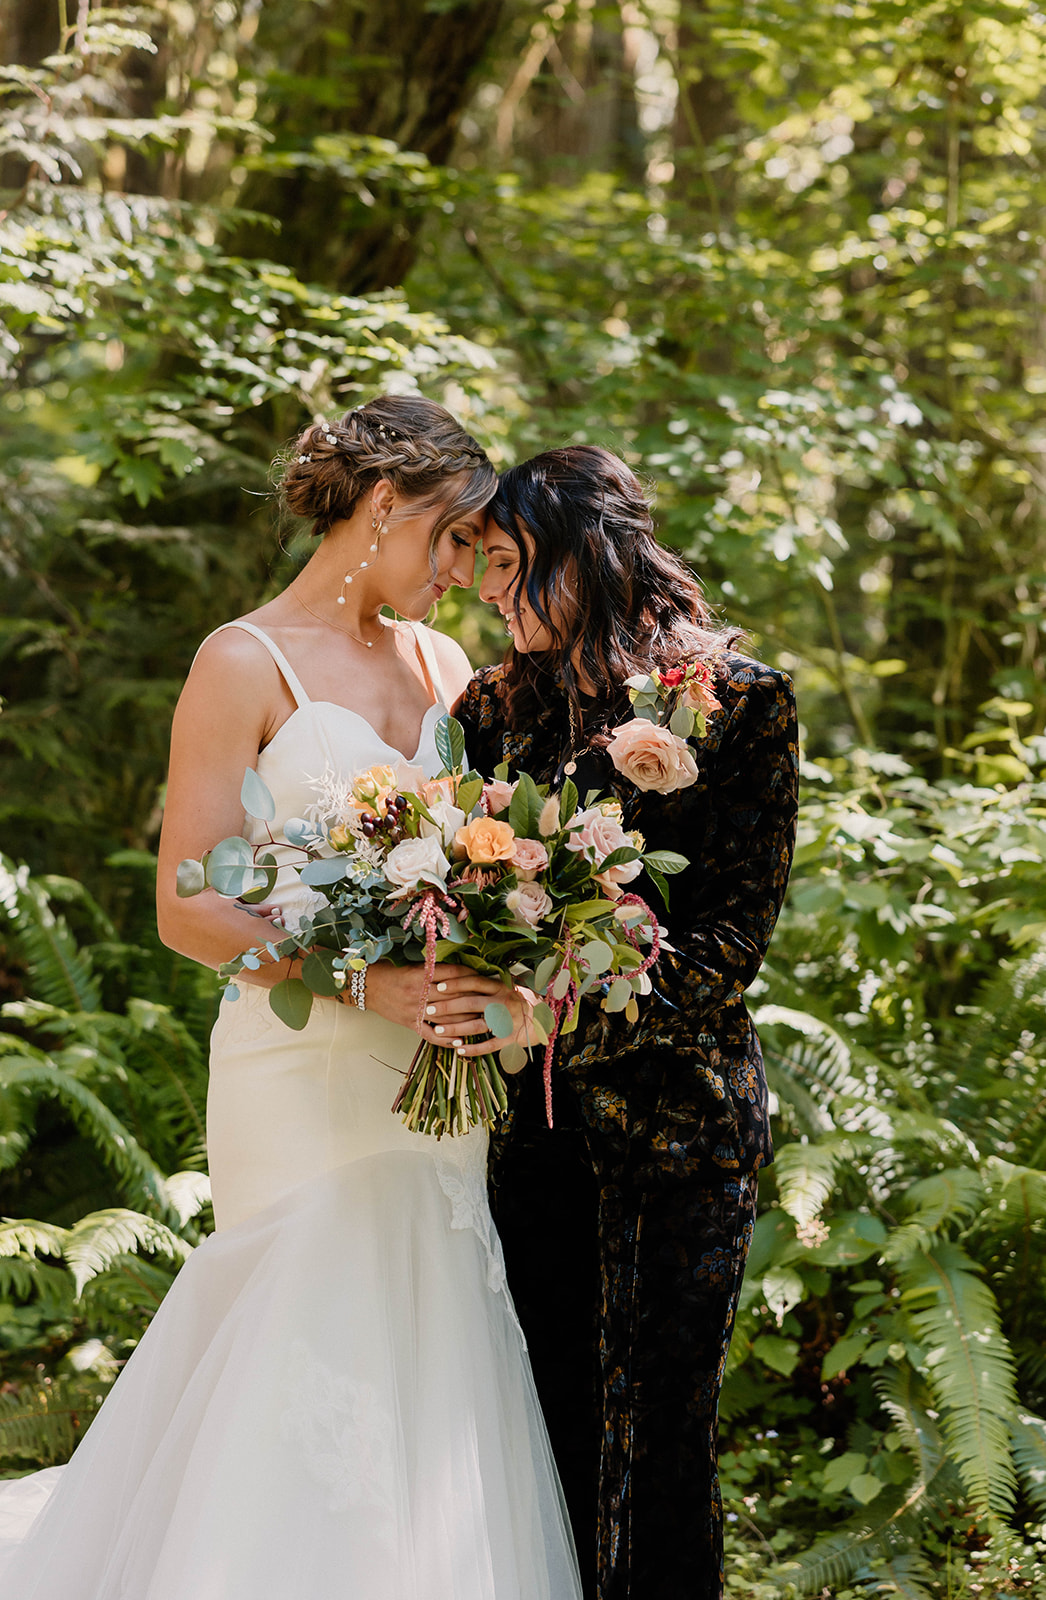 married couple posing in the forest with a bridal bouquet Camp Colton - A Mystical Oregon Wedding Venue